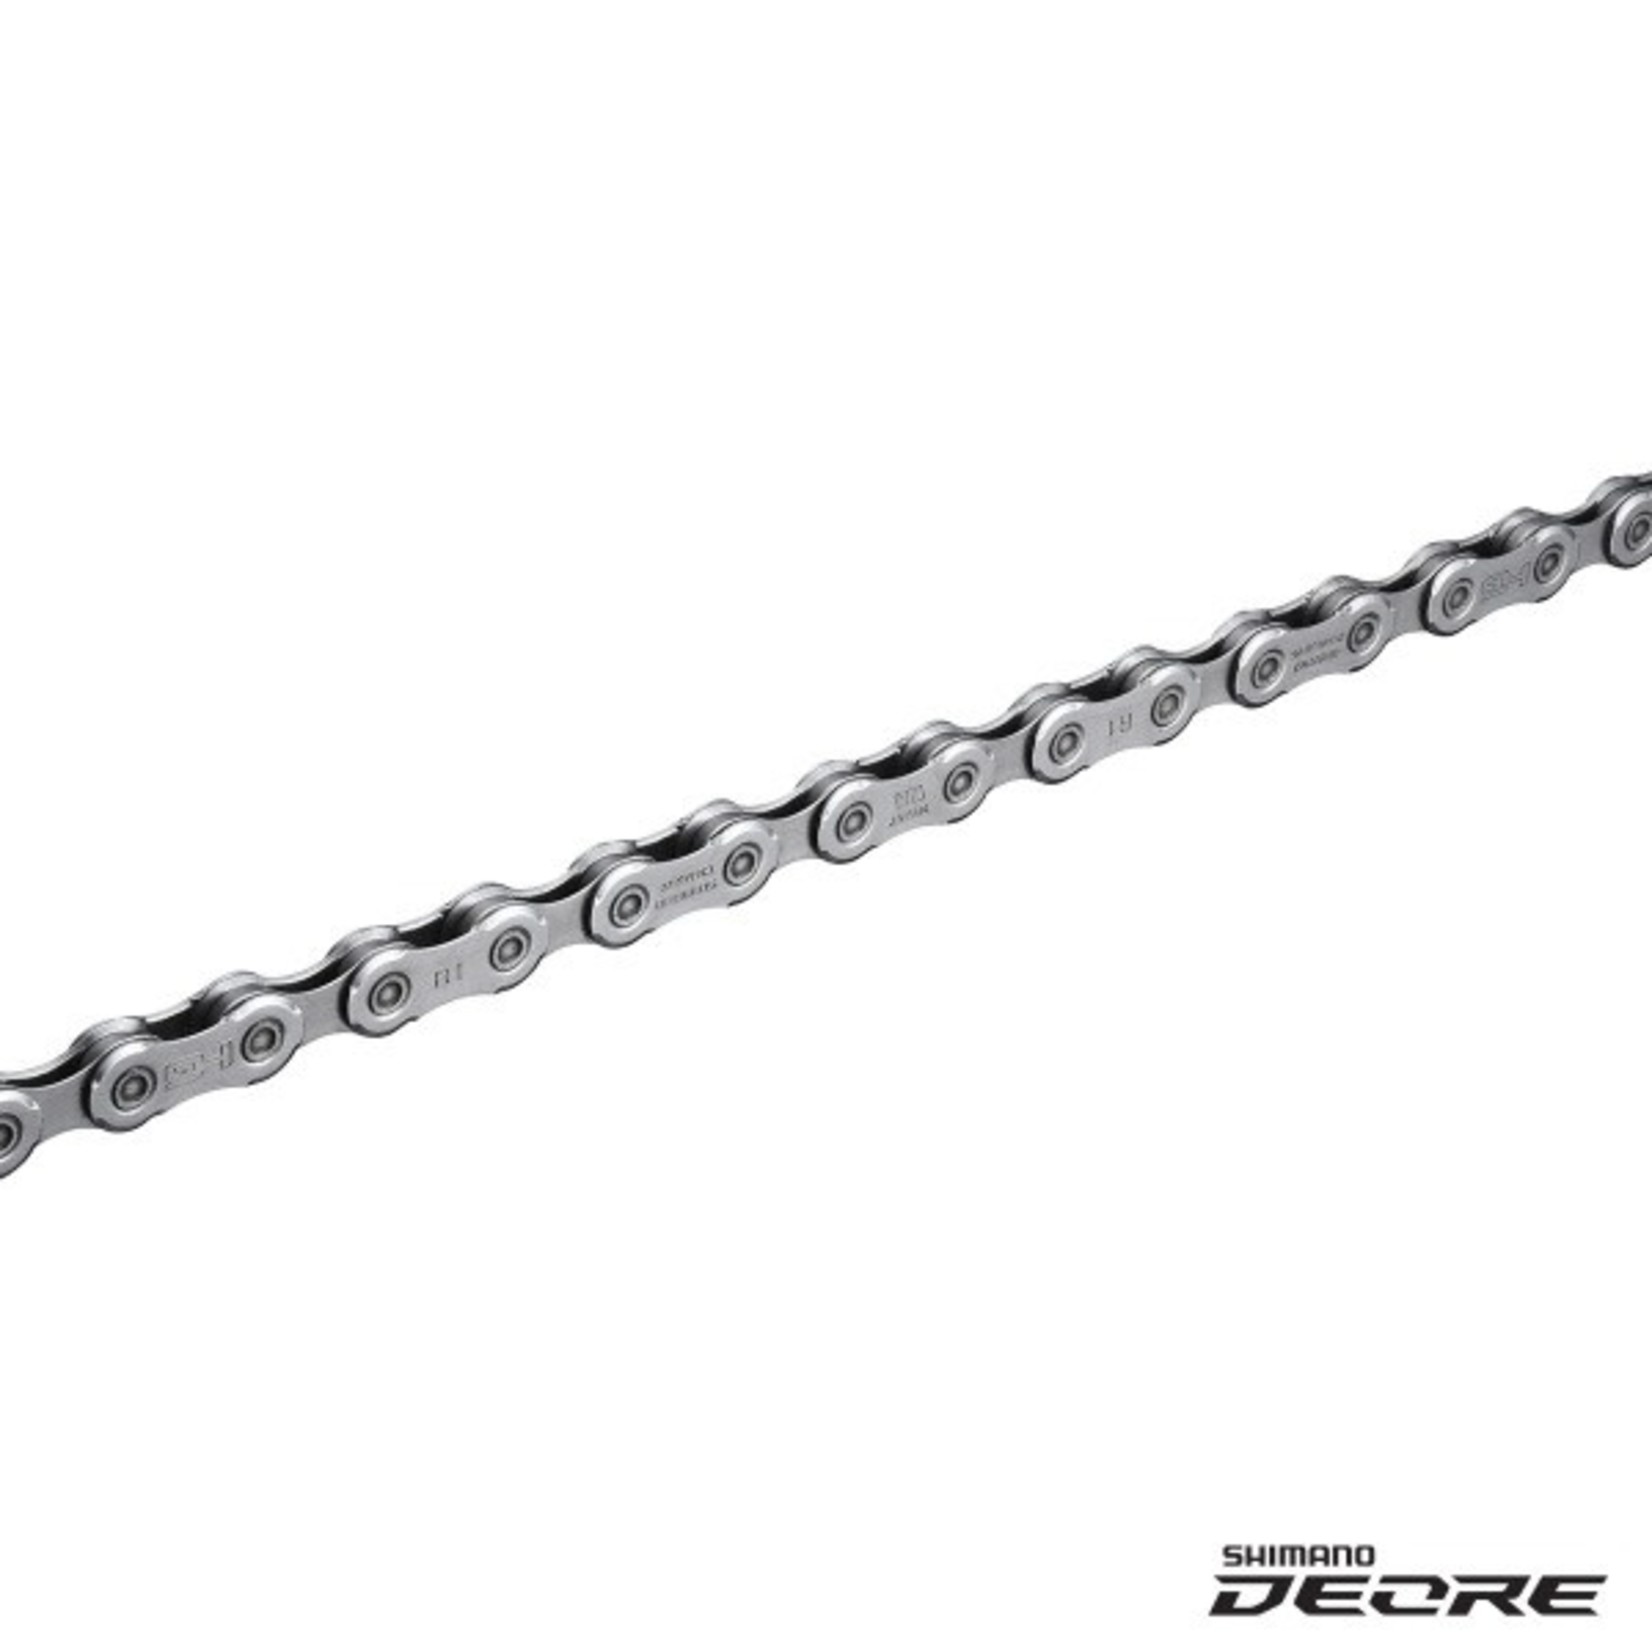 SHIMANO SHIMANO CN-M6100 CHAIN 12-SPEED DEORE w/QUICK LINK 126 LINKS